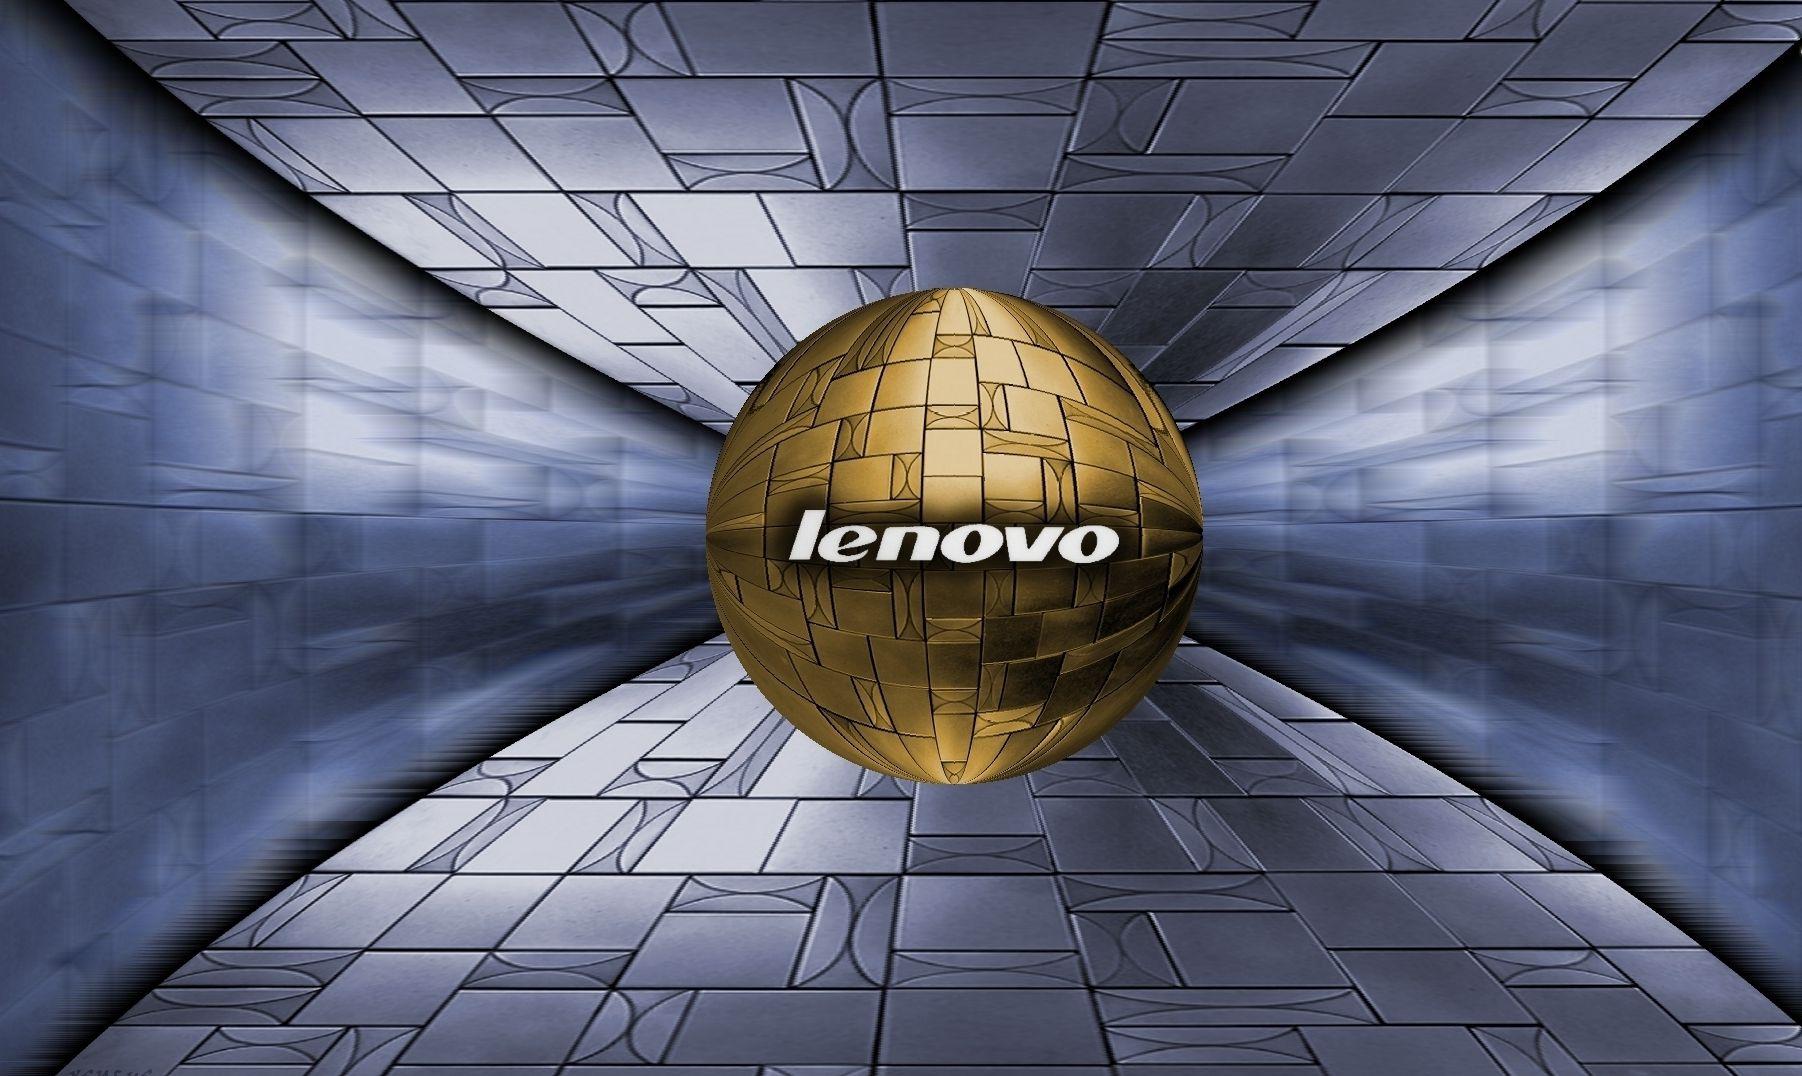 Handpicked Lenovo Wallpapers|Backgrounds In 2K For Free Download